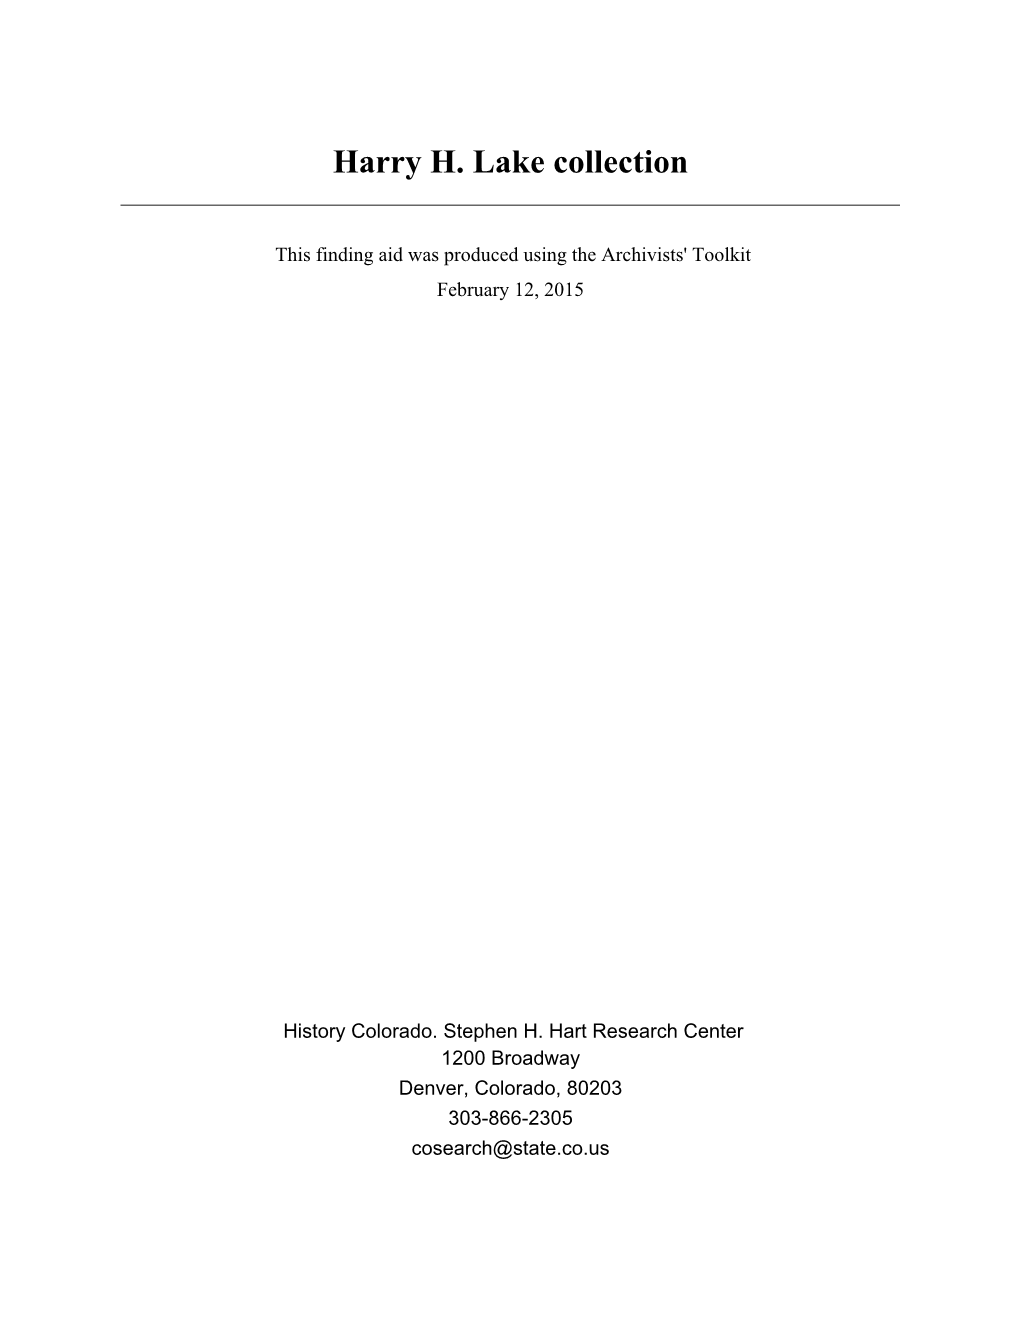 Harry H. Lake Collection